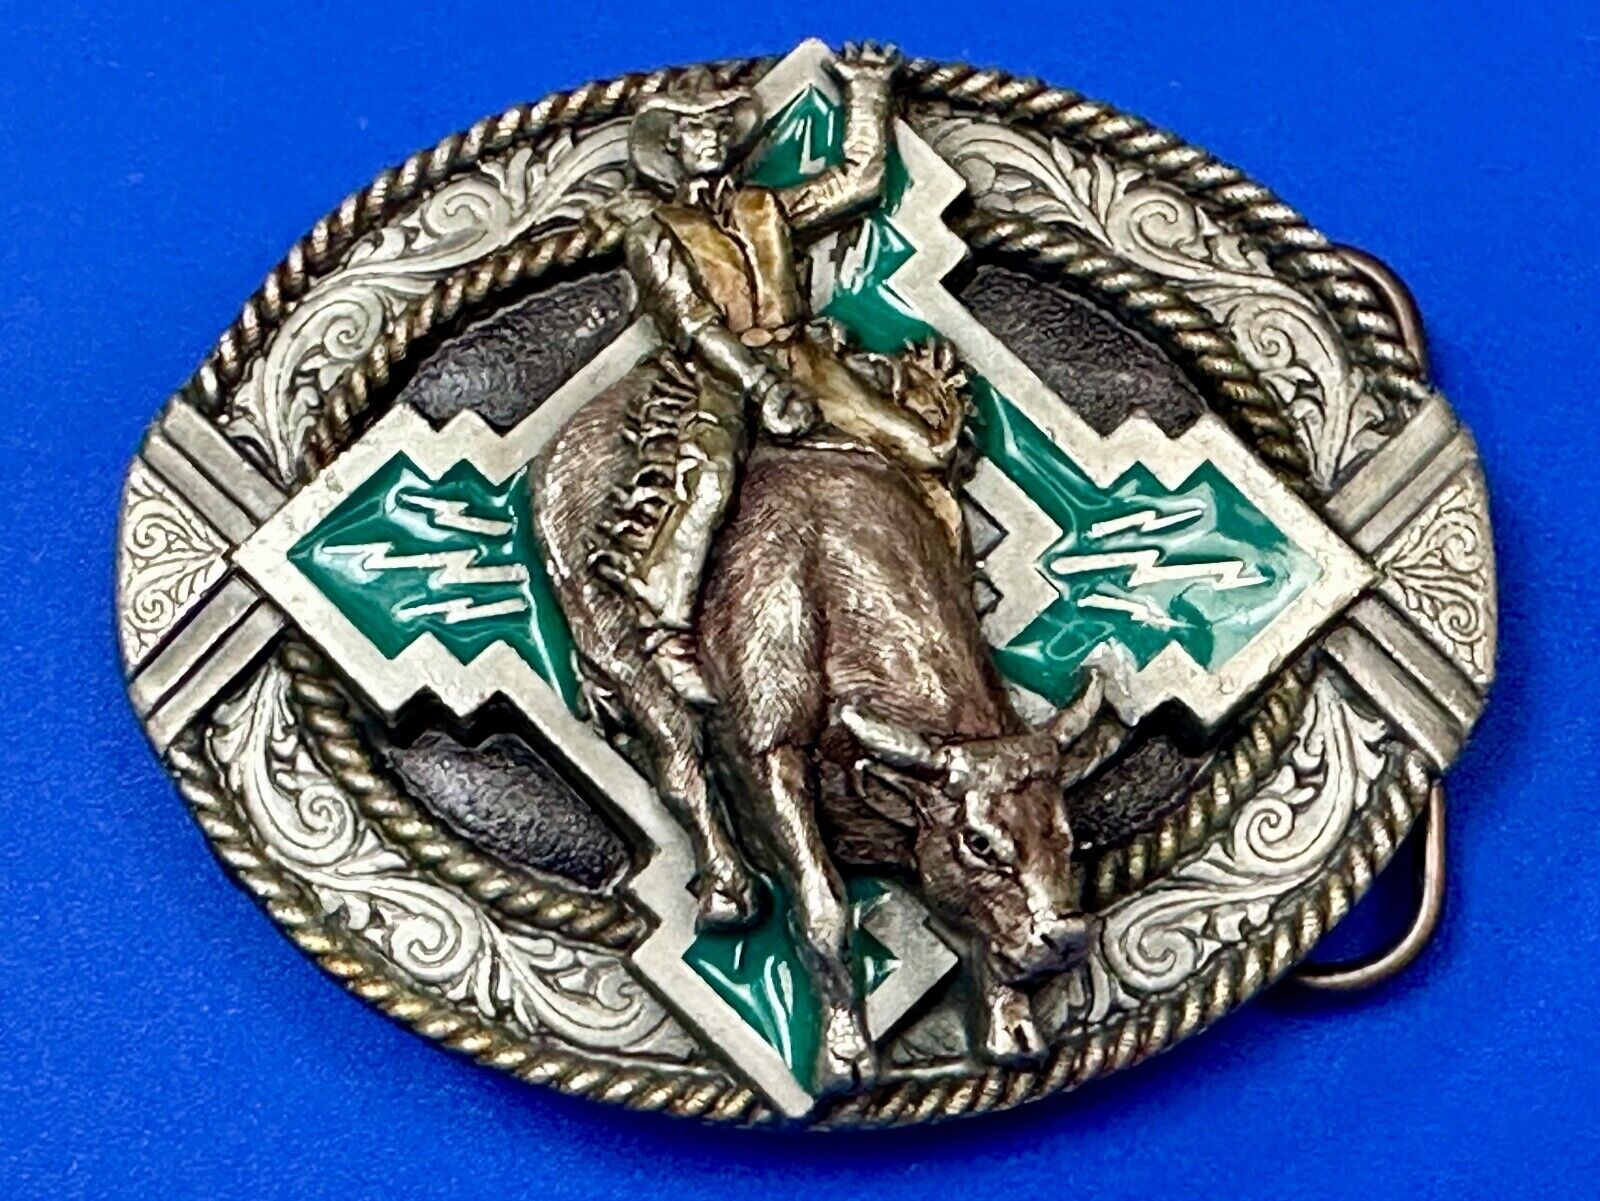 Bull Rider Rodeo Cowboy  Signed & Numbered Pewter Bergamot 1996 H-23 Belt Buckle